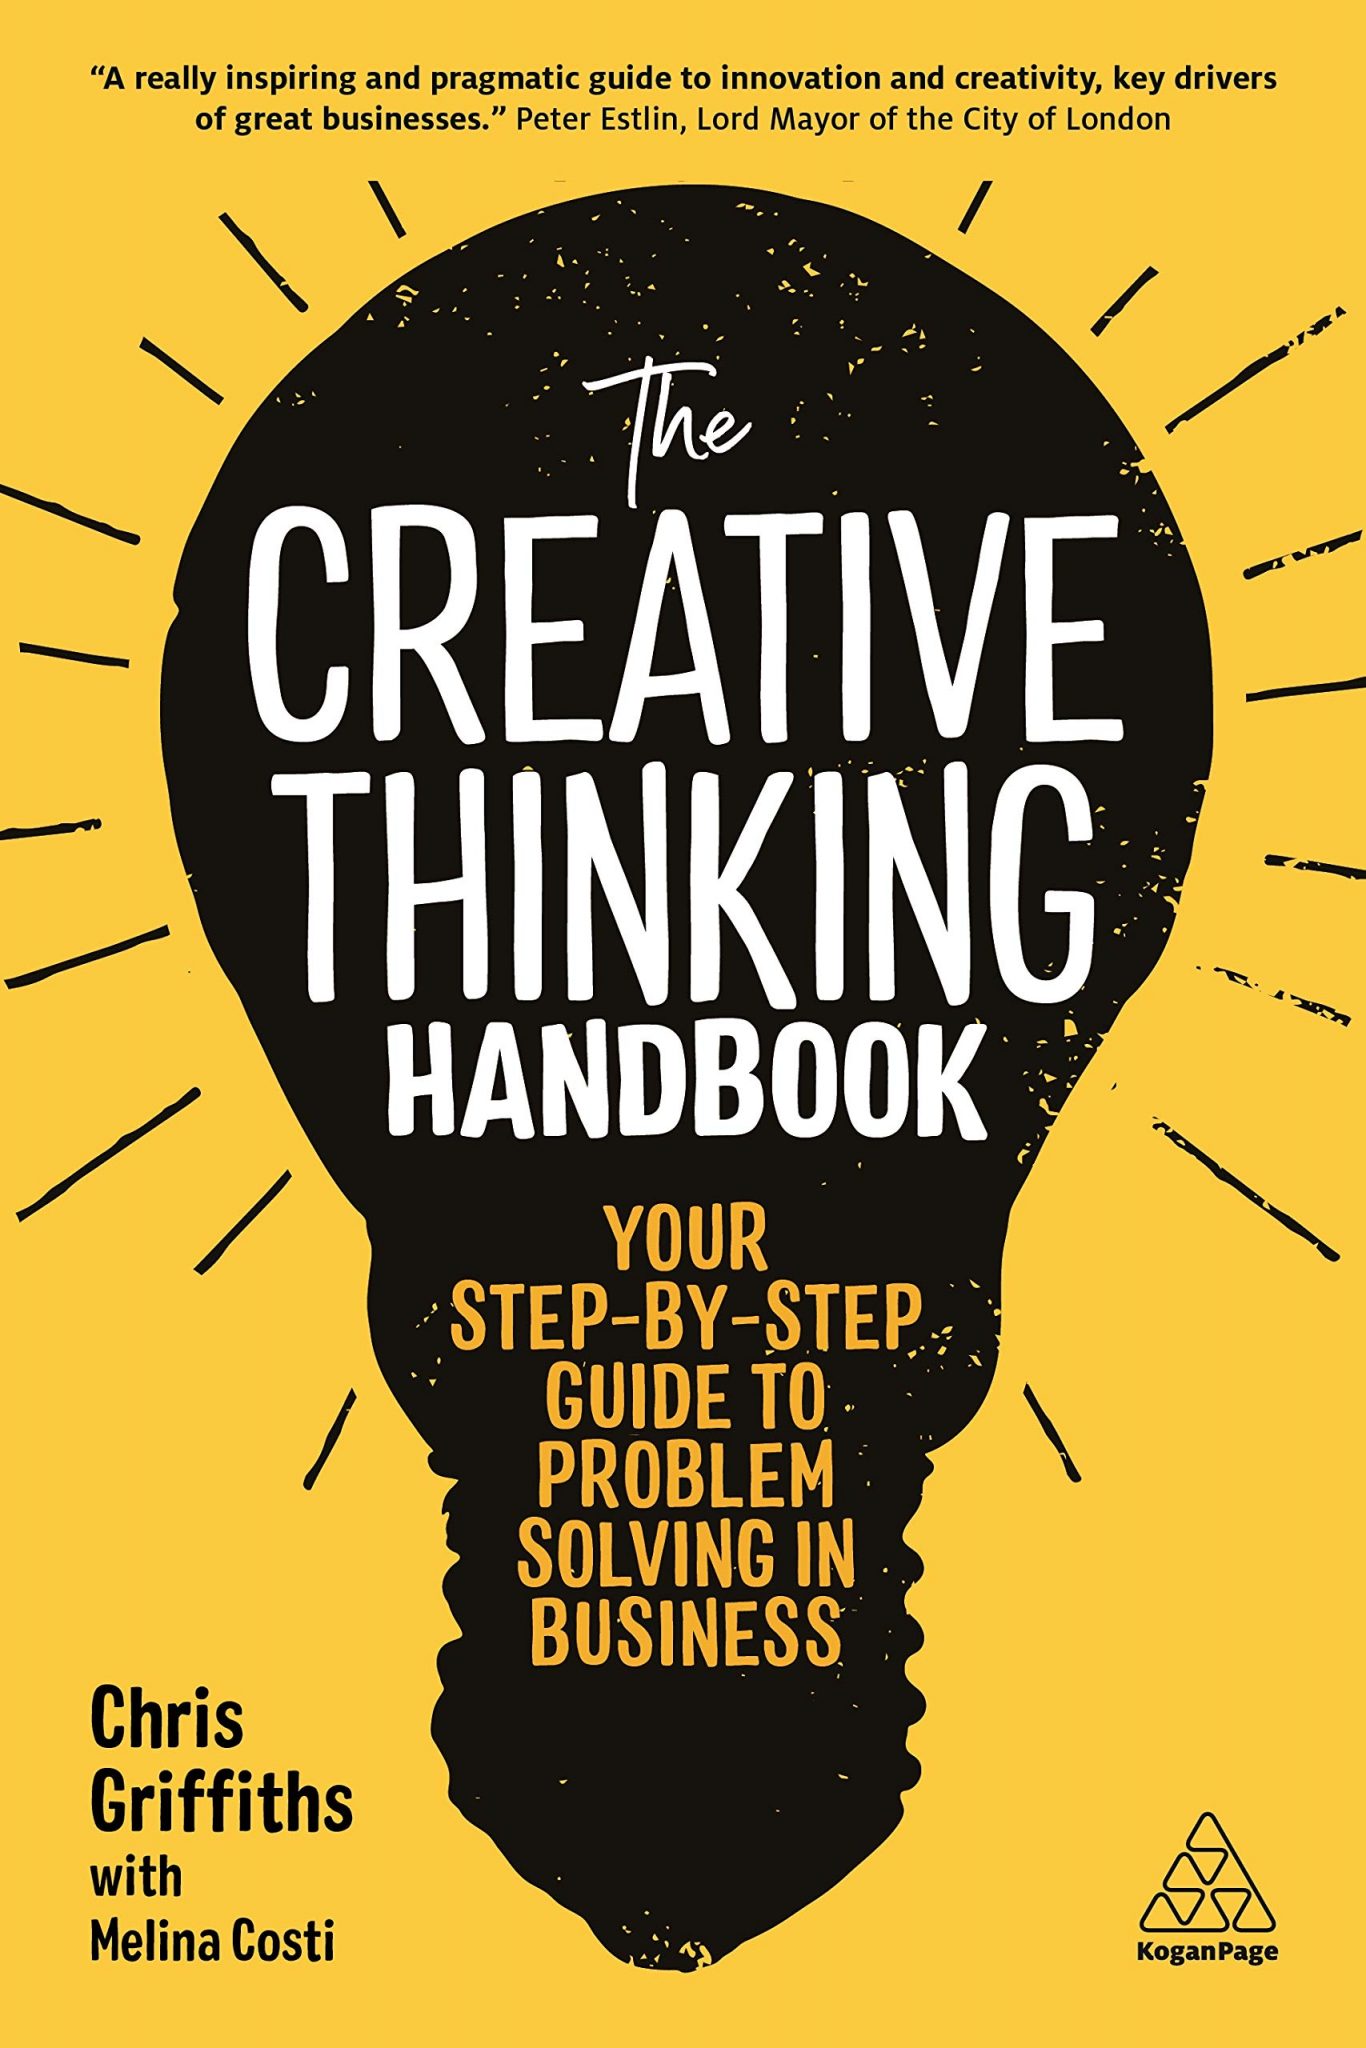 5 Top Business Books for World Creativity & Innovation Day